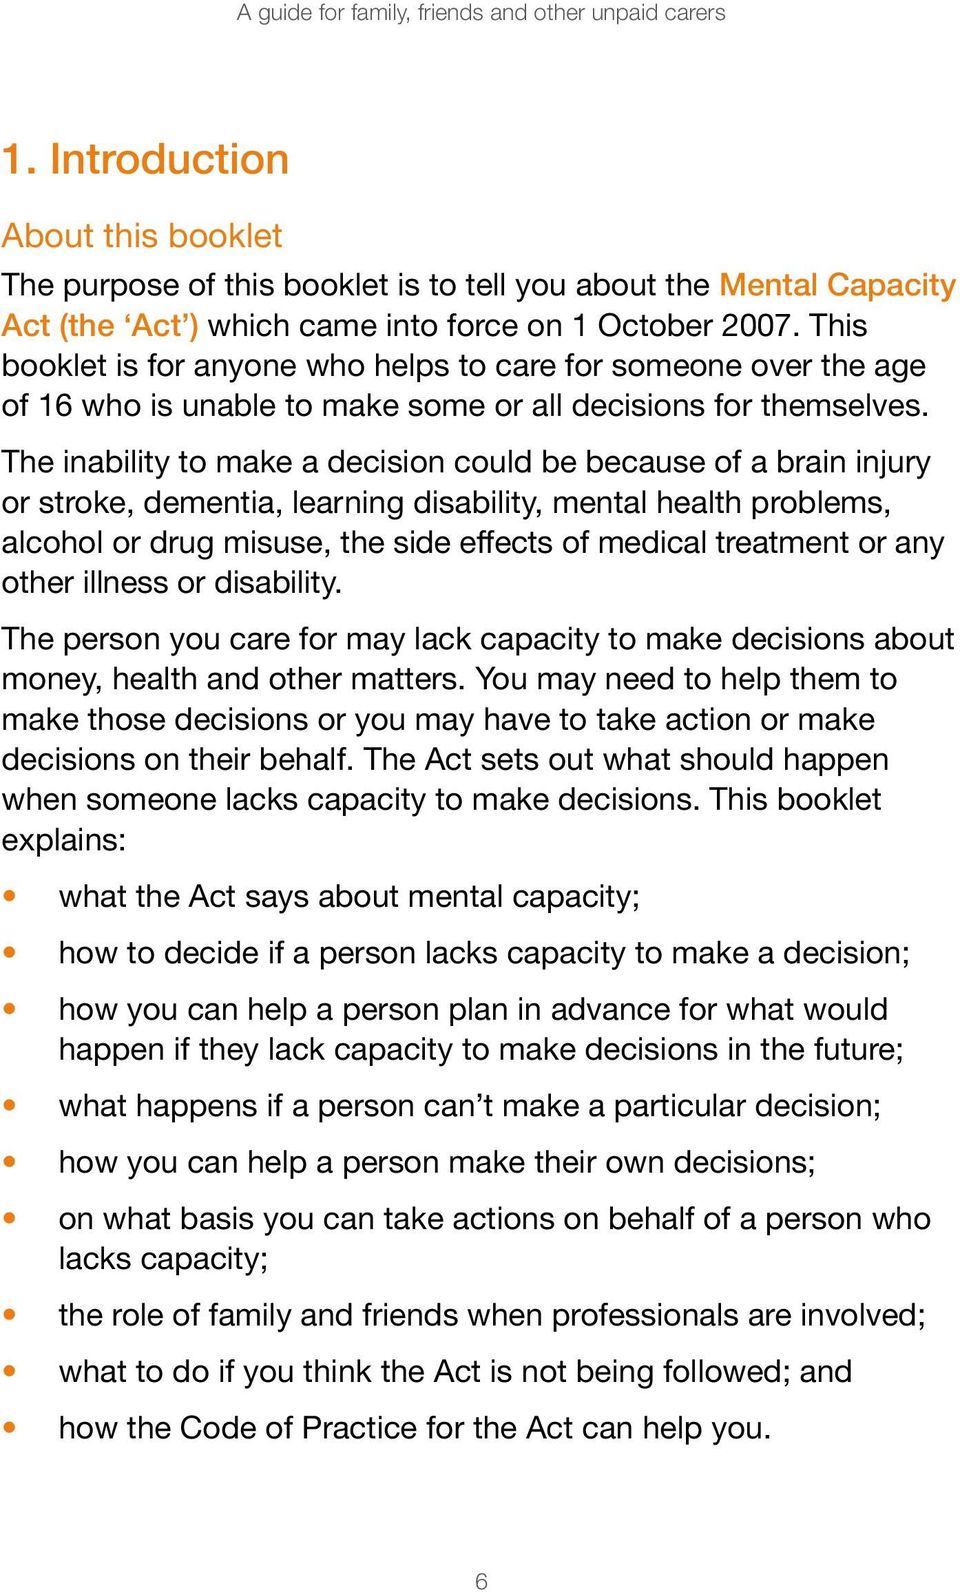 The inability to make a decision could be because of a brain injury or stroke, dementia, learning disability, mental health problems, alcohol or drug misuse, the side effects of medical treatment or